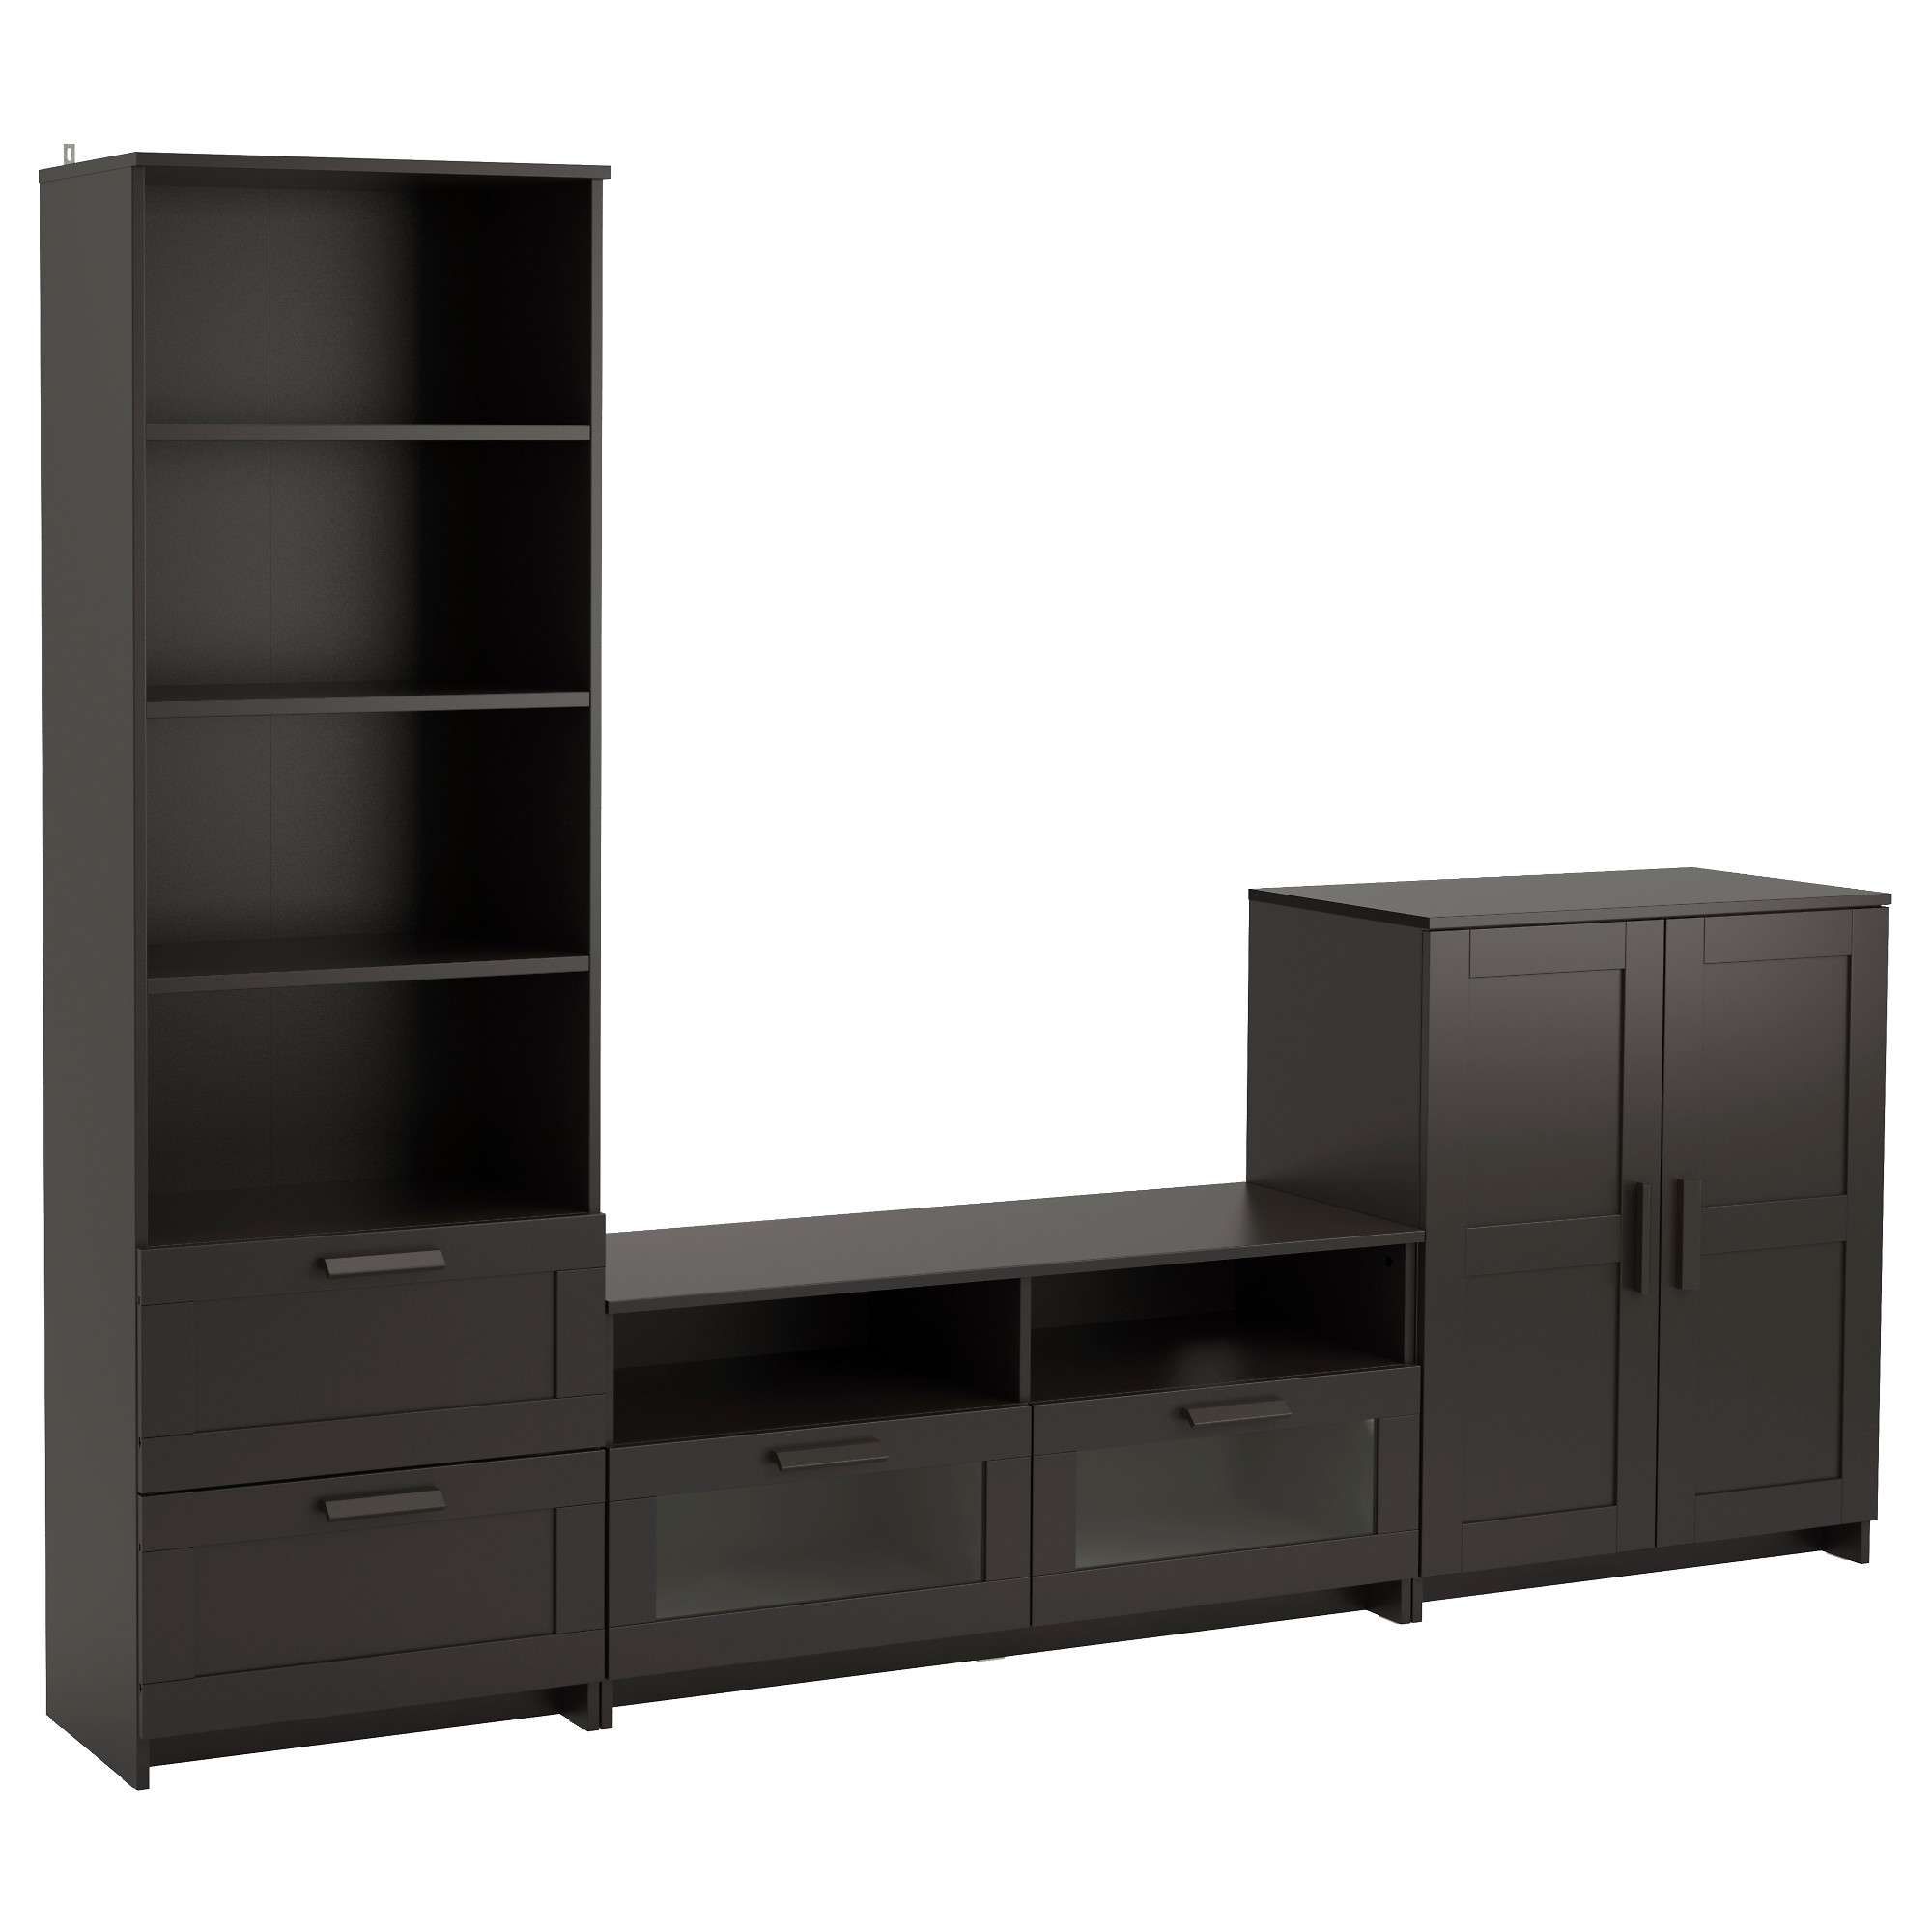 Brimnes Tv Storage Combination Black 260x41x190 Cm – Ikea Intended For Storage Tv Stands (View 3 of 15)